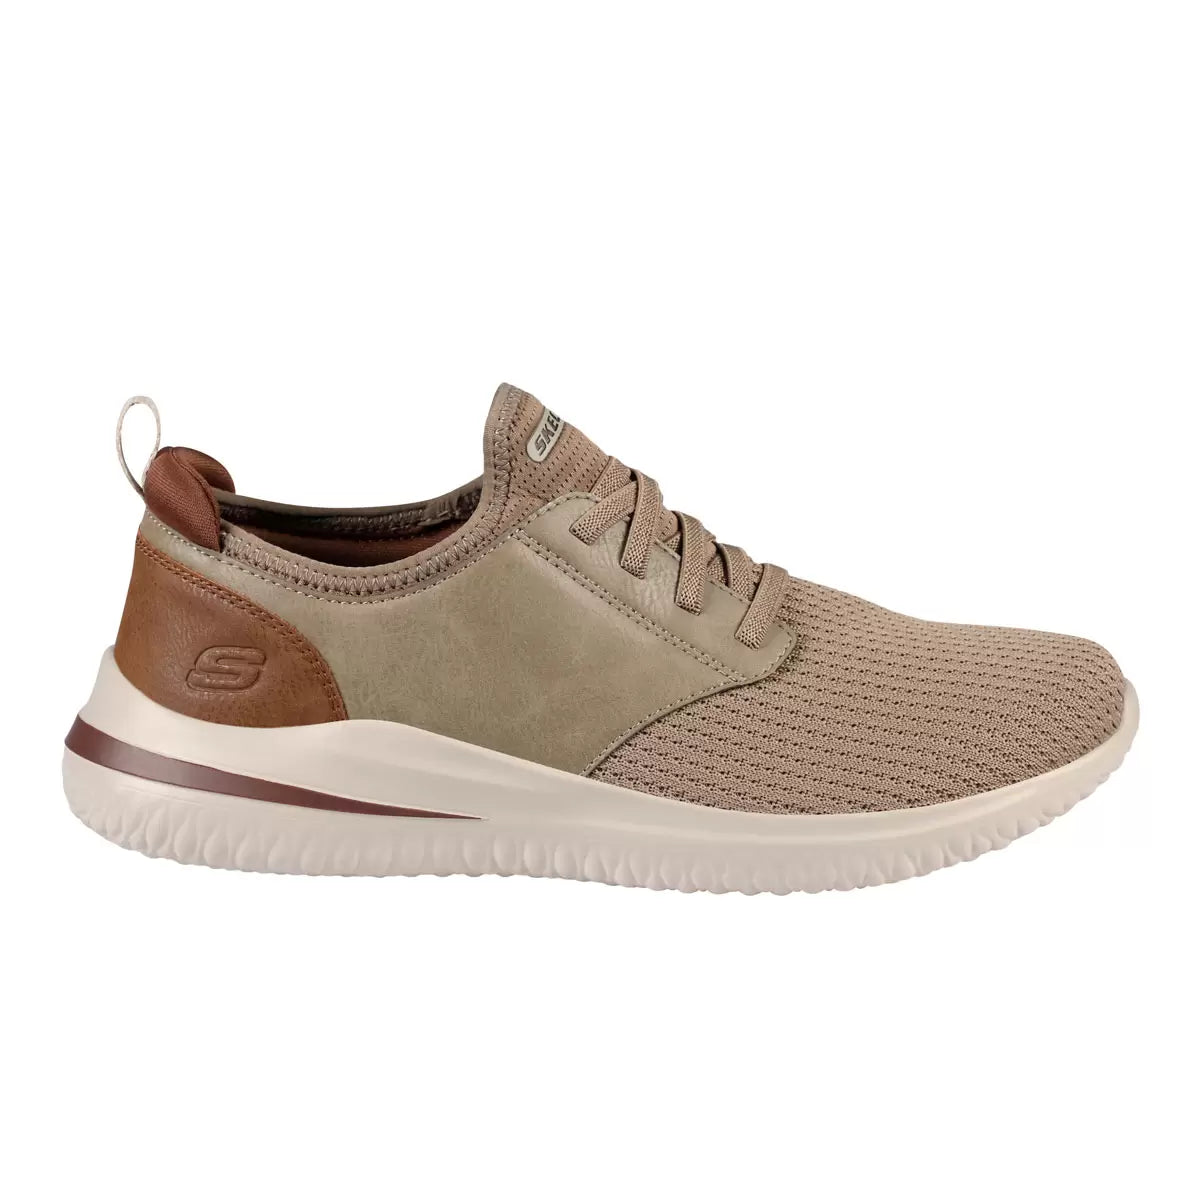 Skechers Men's Delson Taupe 1662281